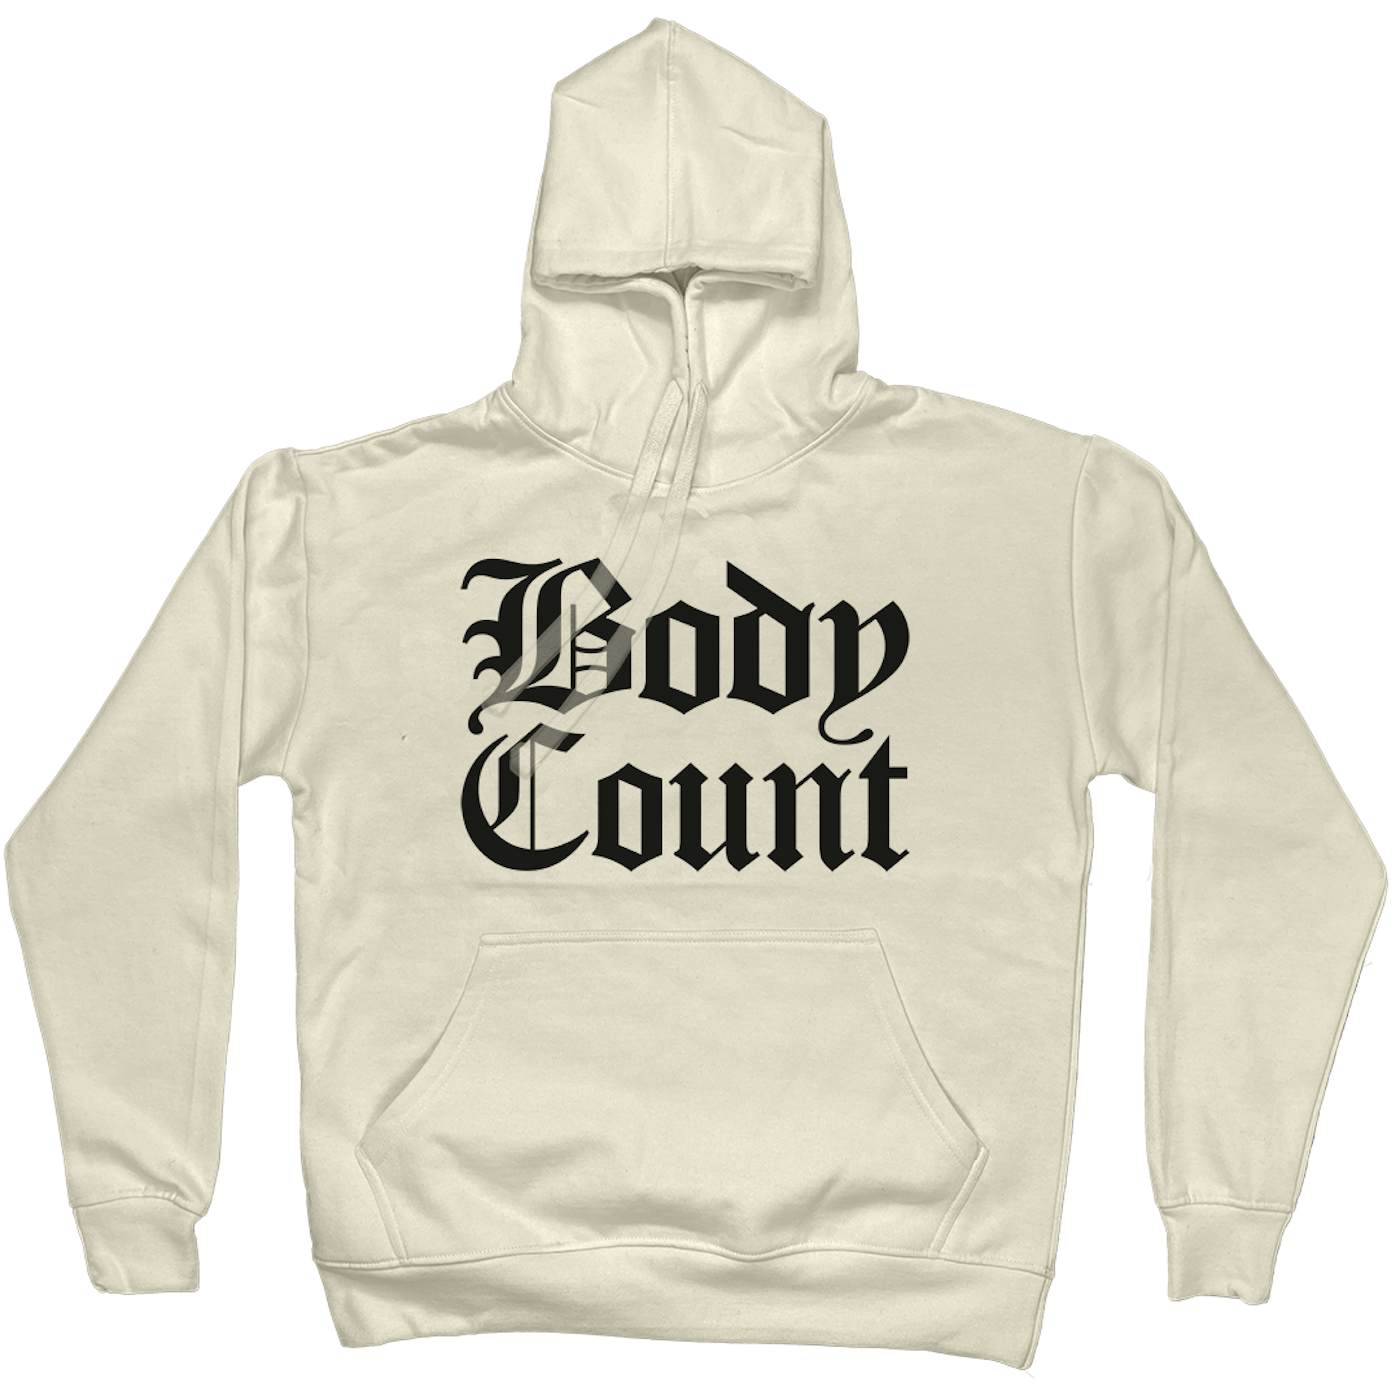 Body Count "Old English Logo" Pullover Hoodie in Natural